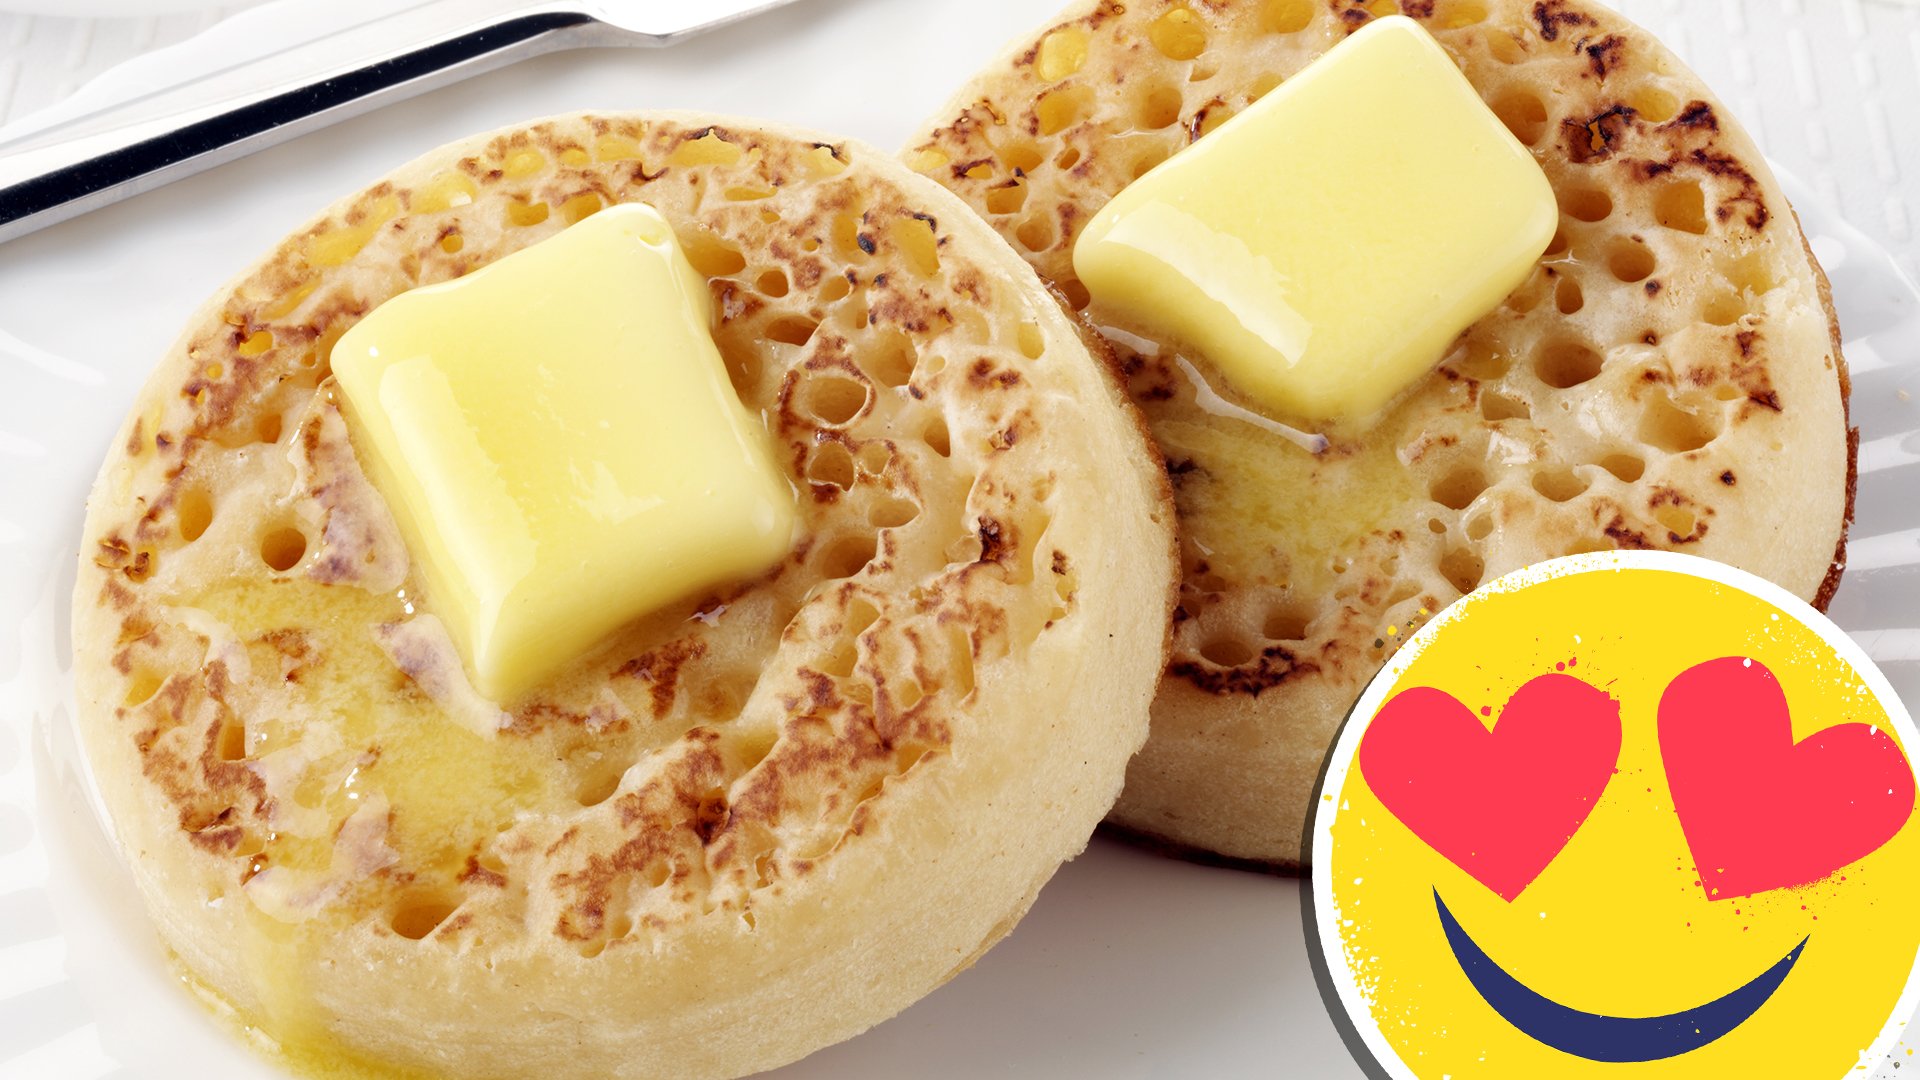 Buttery crumpets